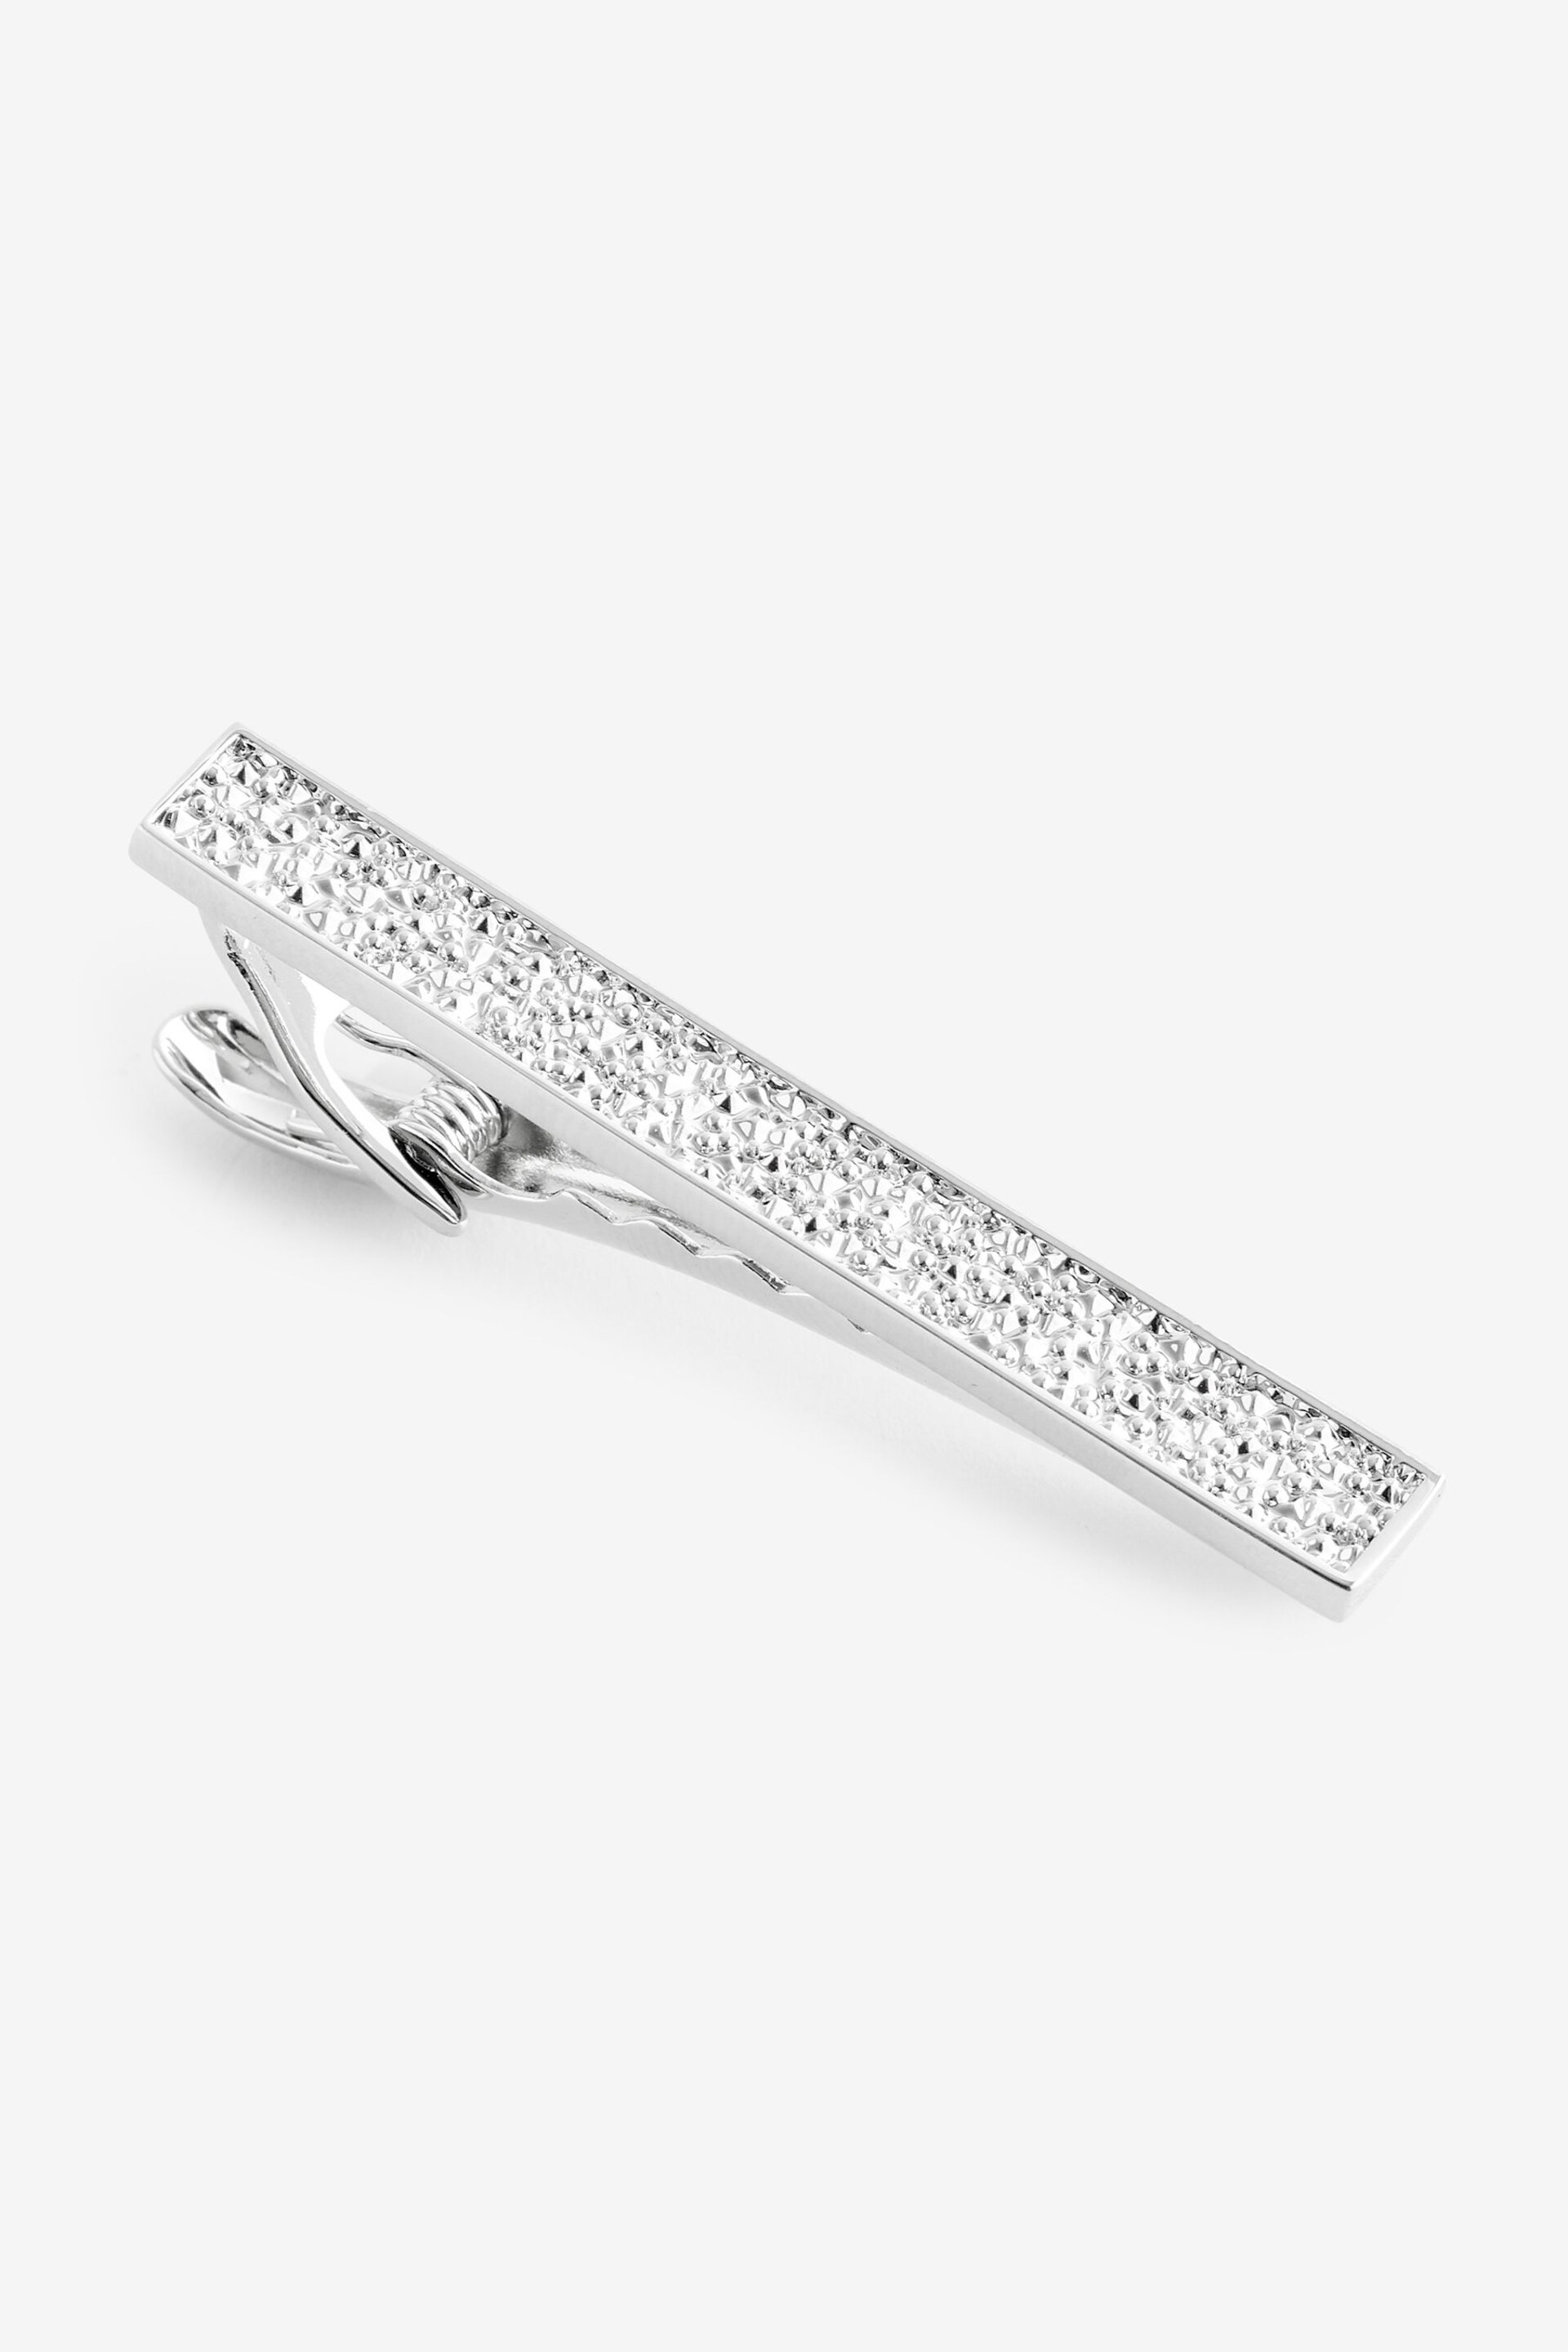 Silver Glitter Textured Cufflink And Tie Clip Set - Image 3 of 6